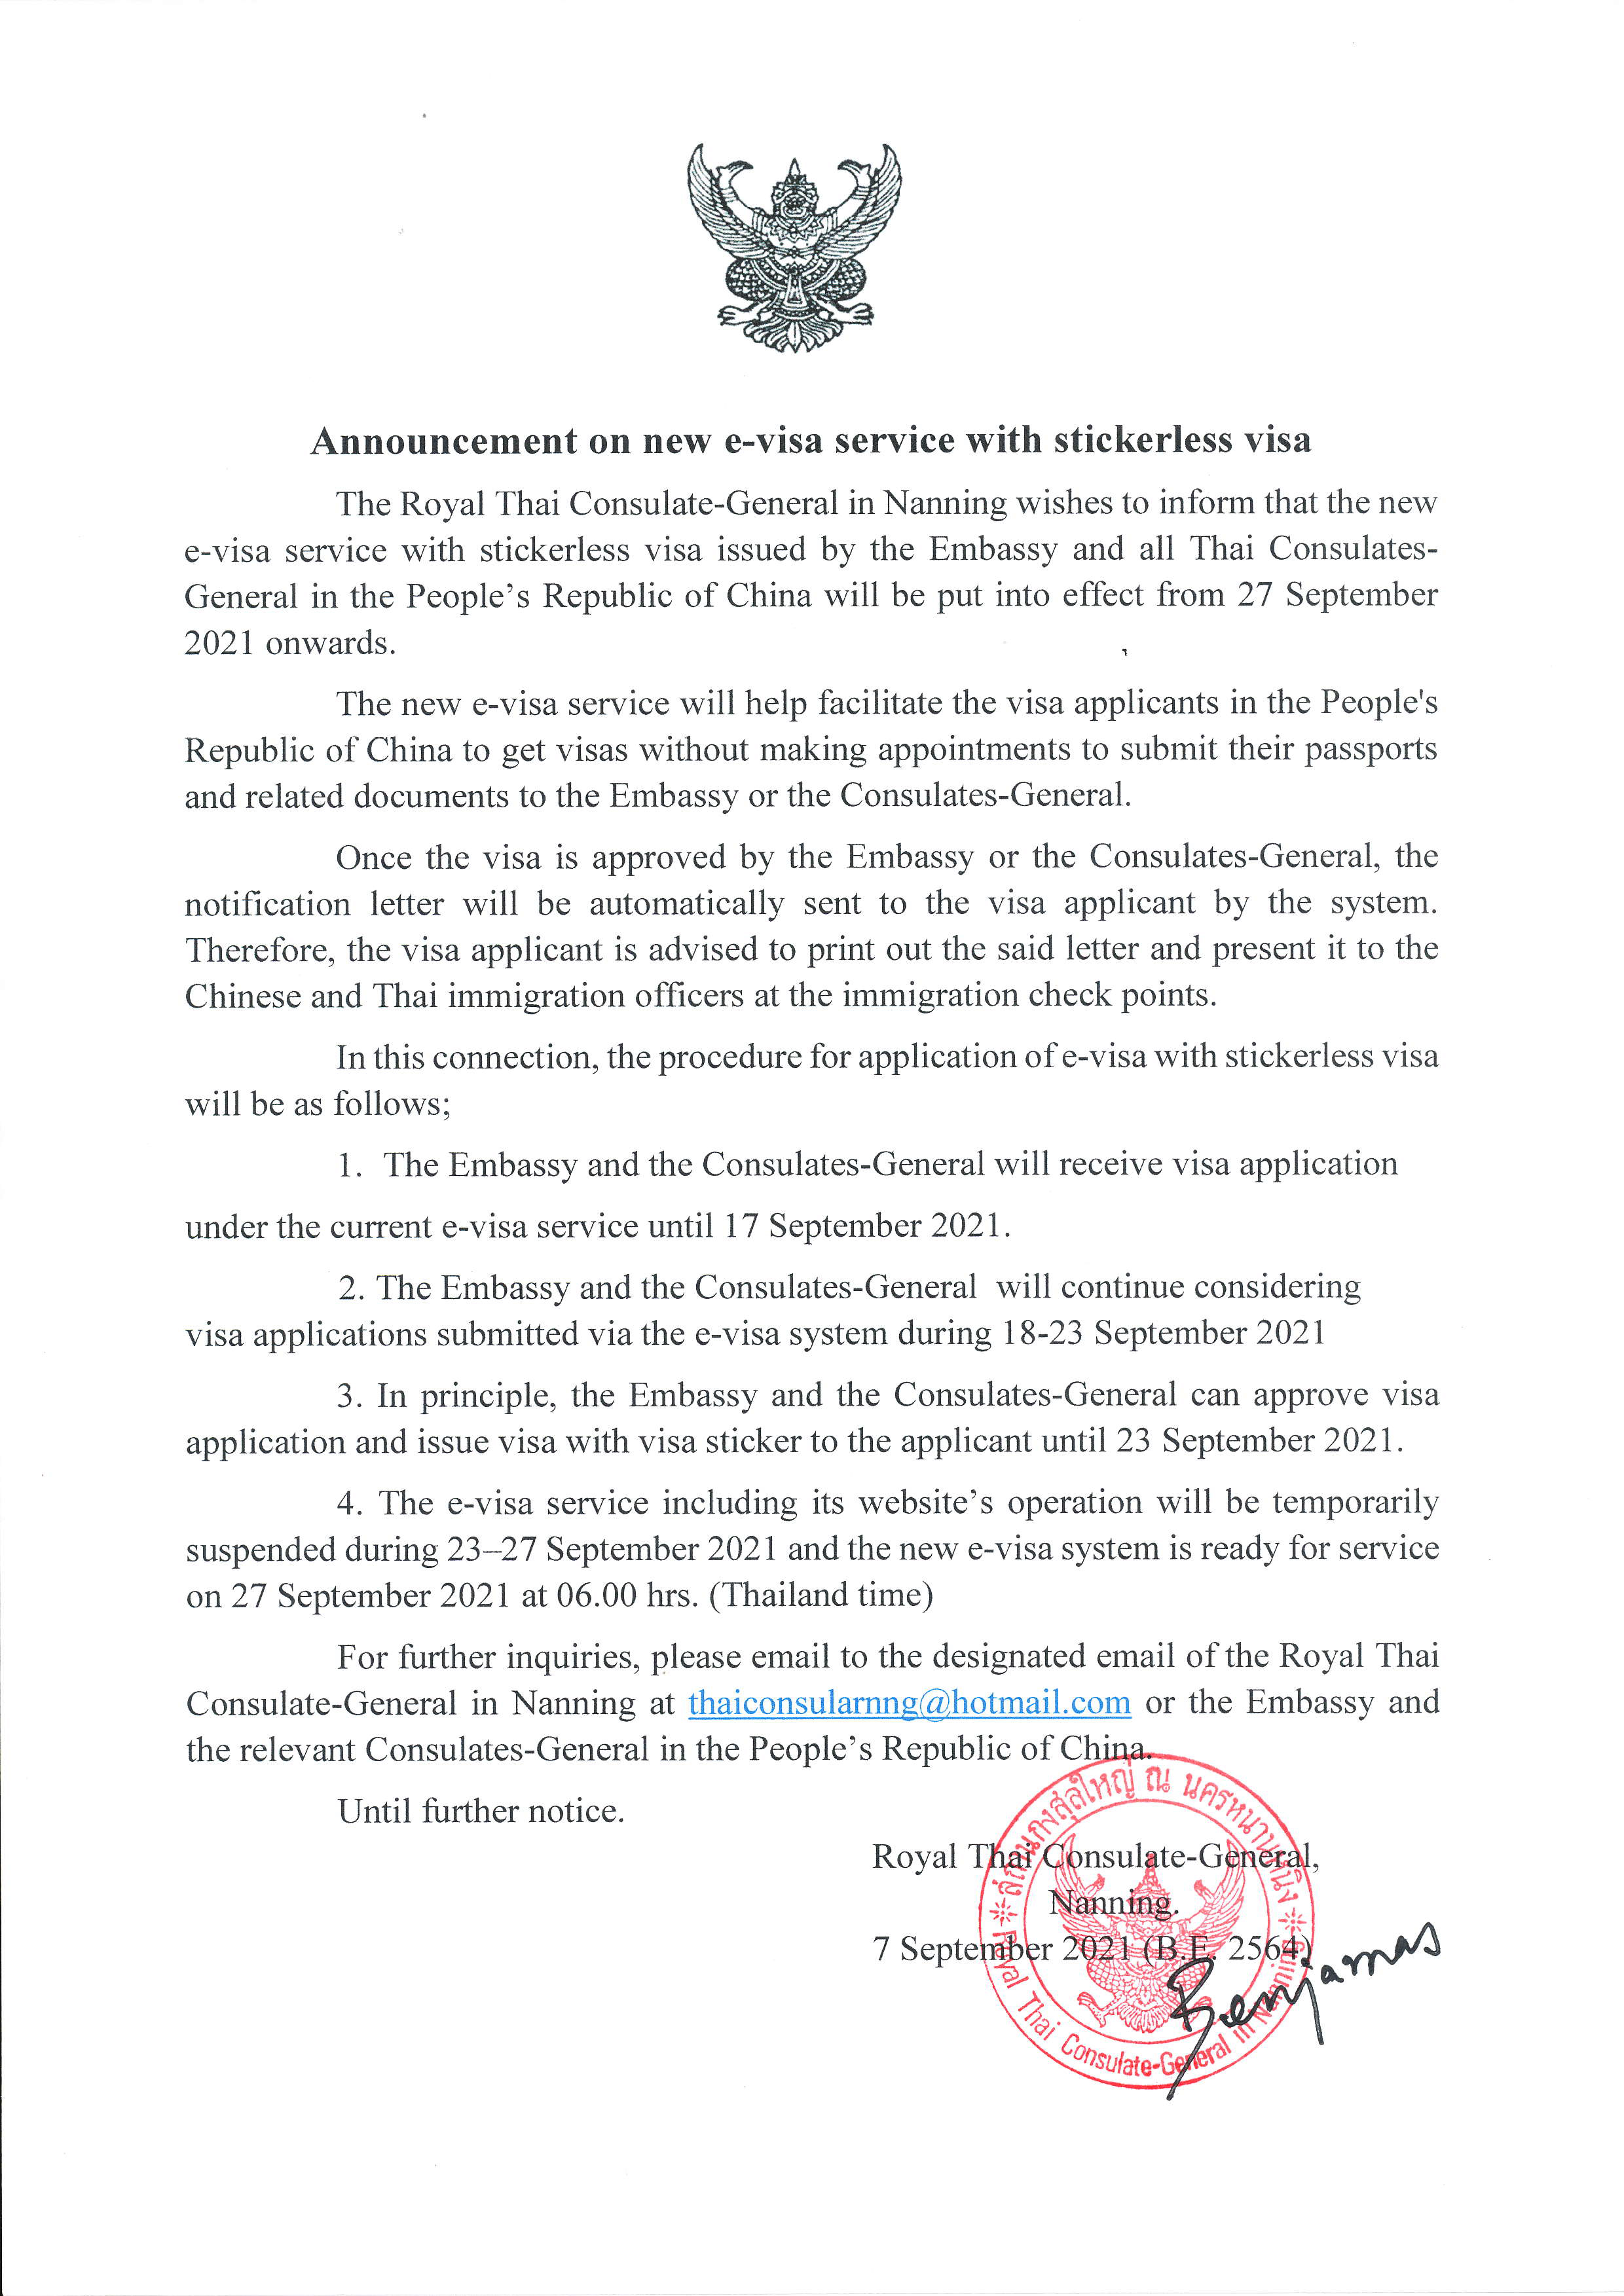 Announcement_on_new_e-visa_service_with_stickerless_visa